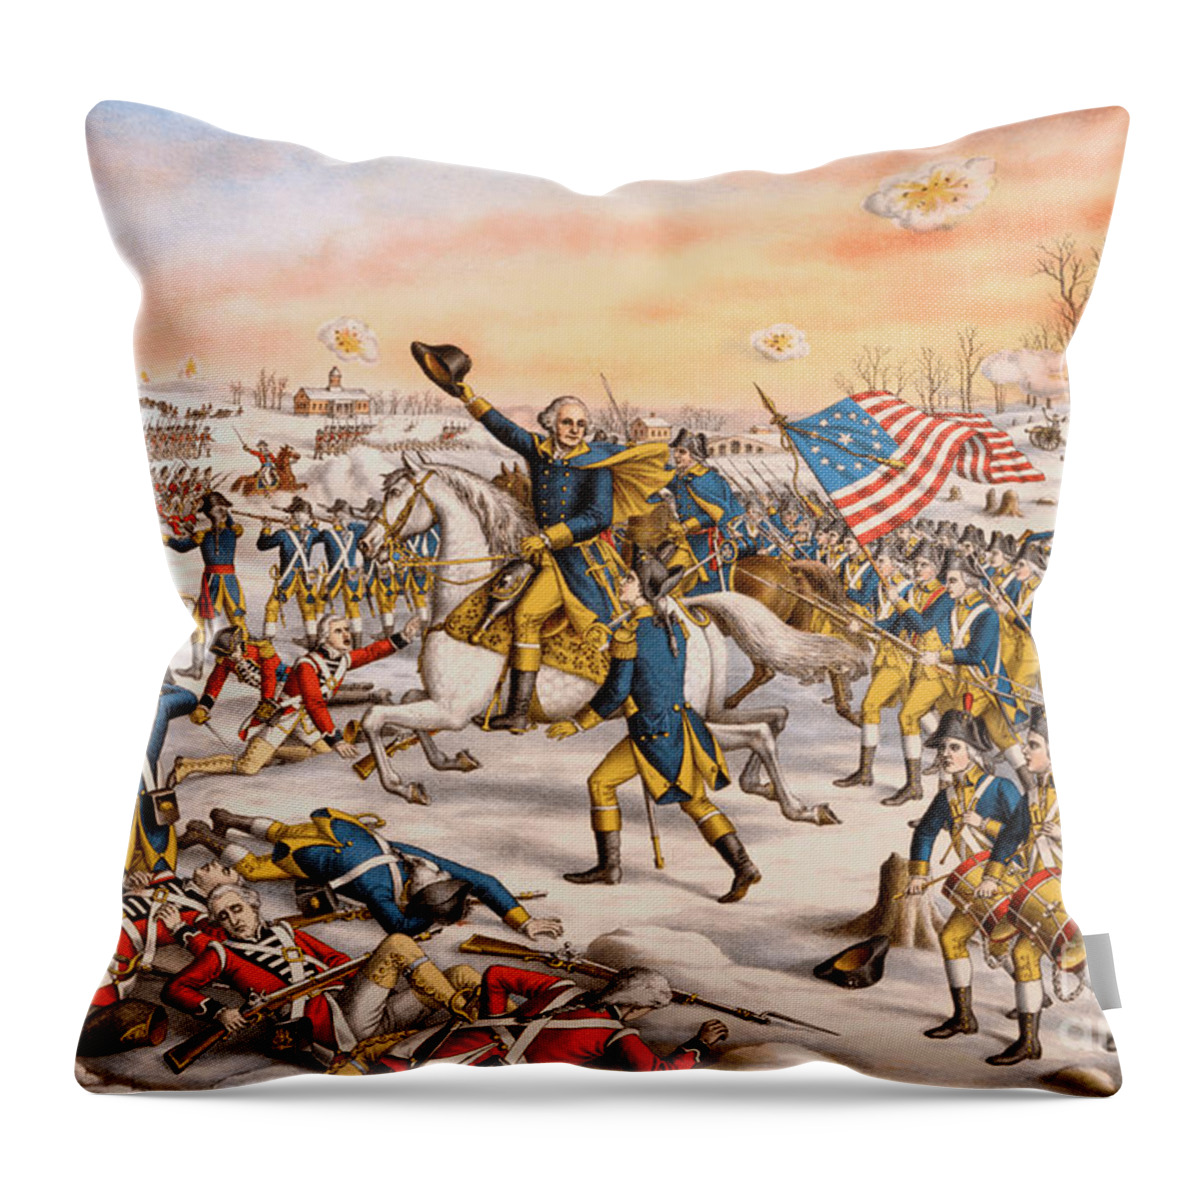 George Throw Pillow featuring the photograph George Washington And The American Revolution by Action